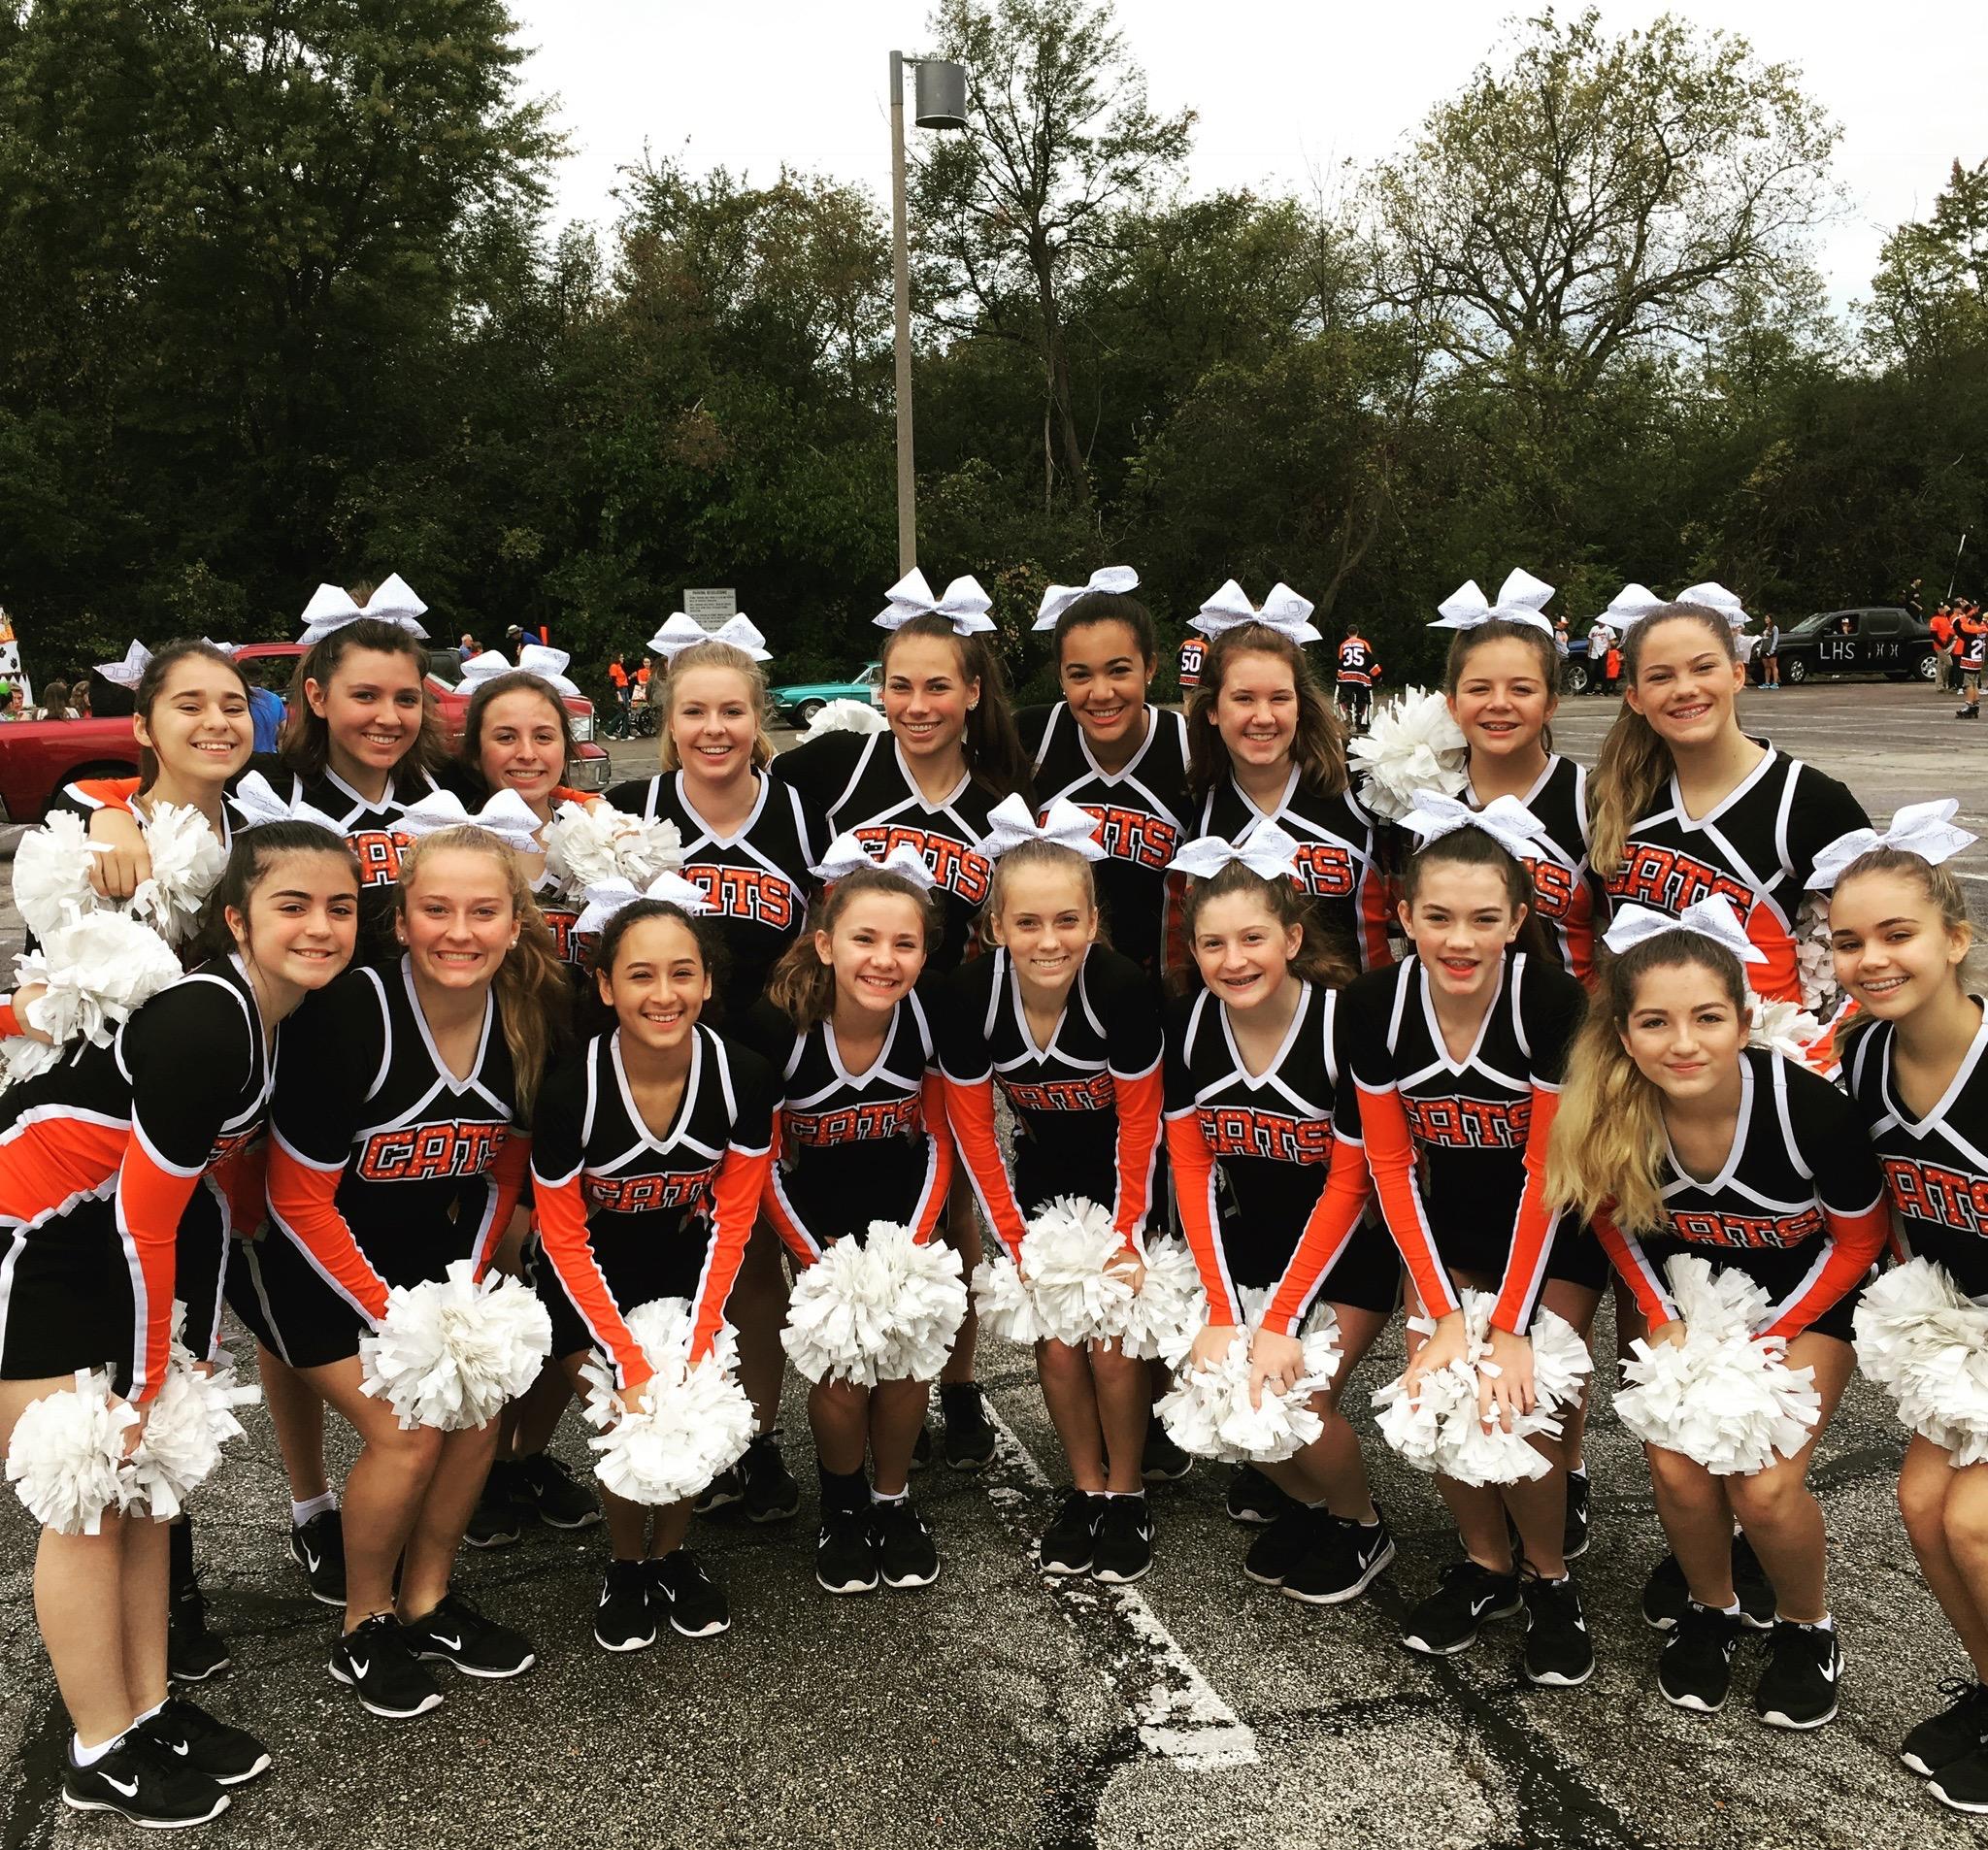 JV team photo before marching in parade